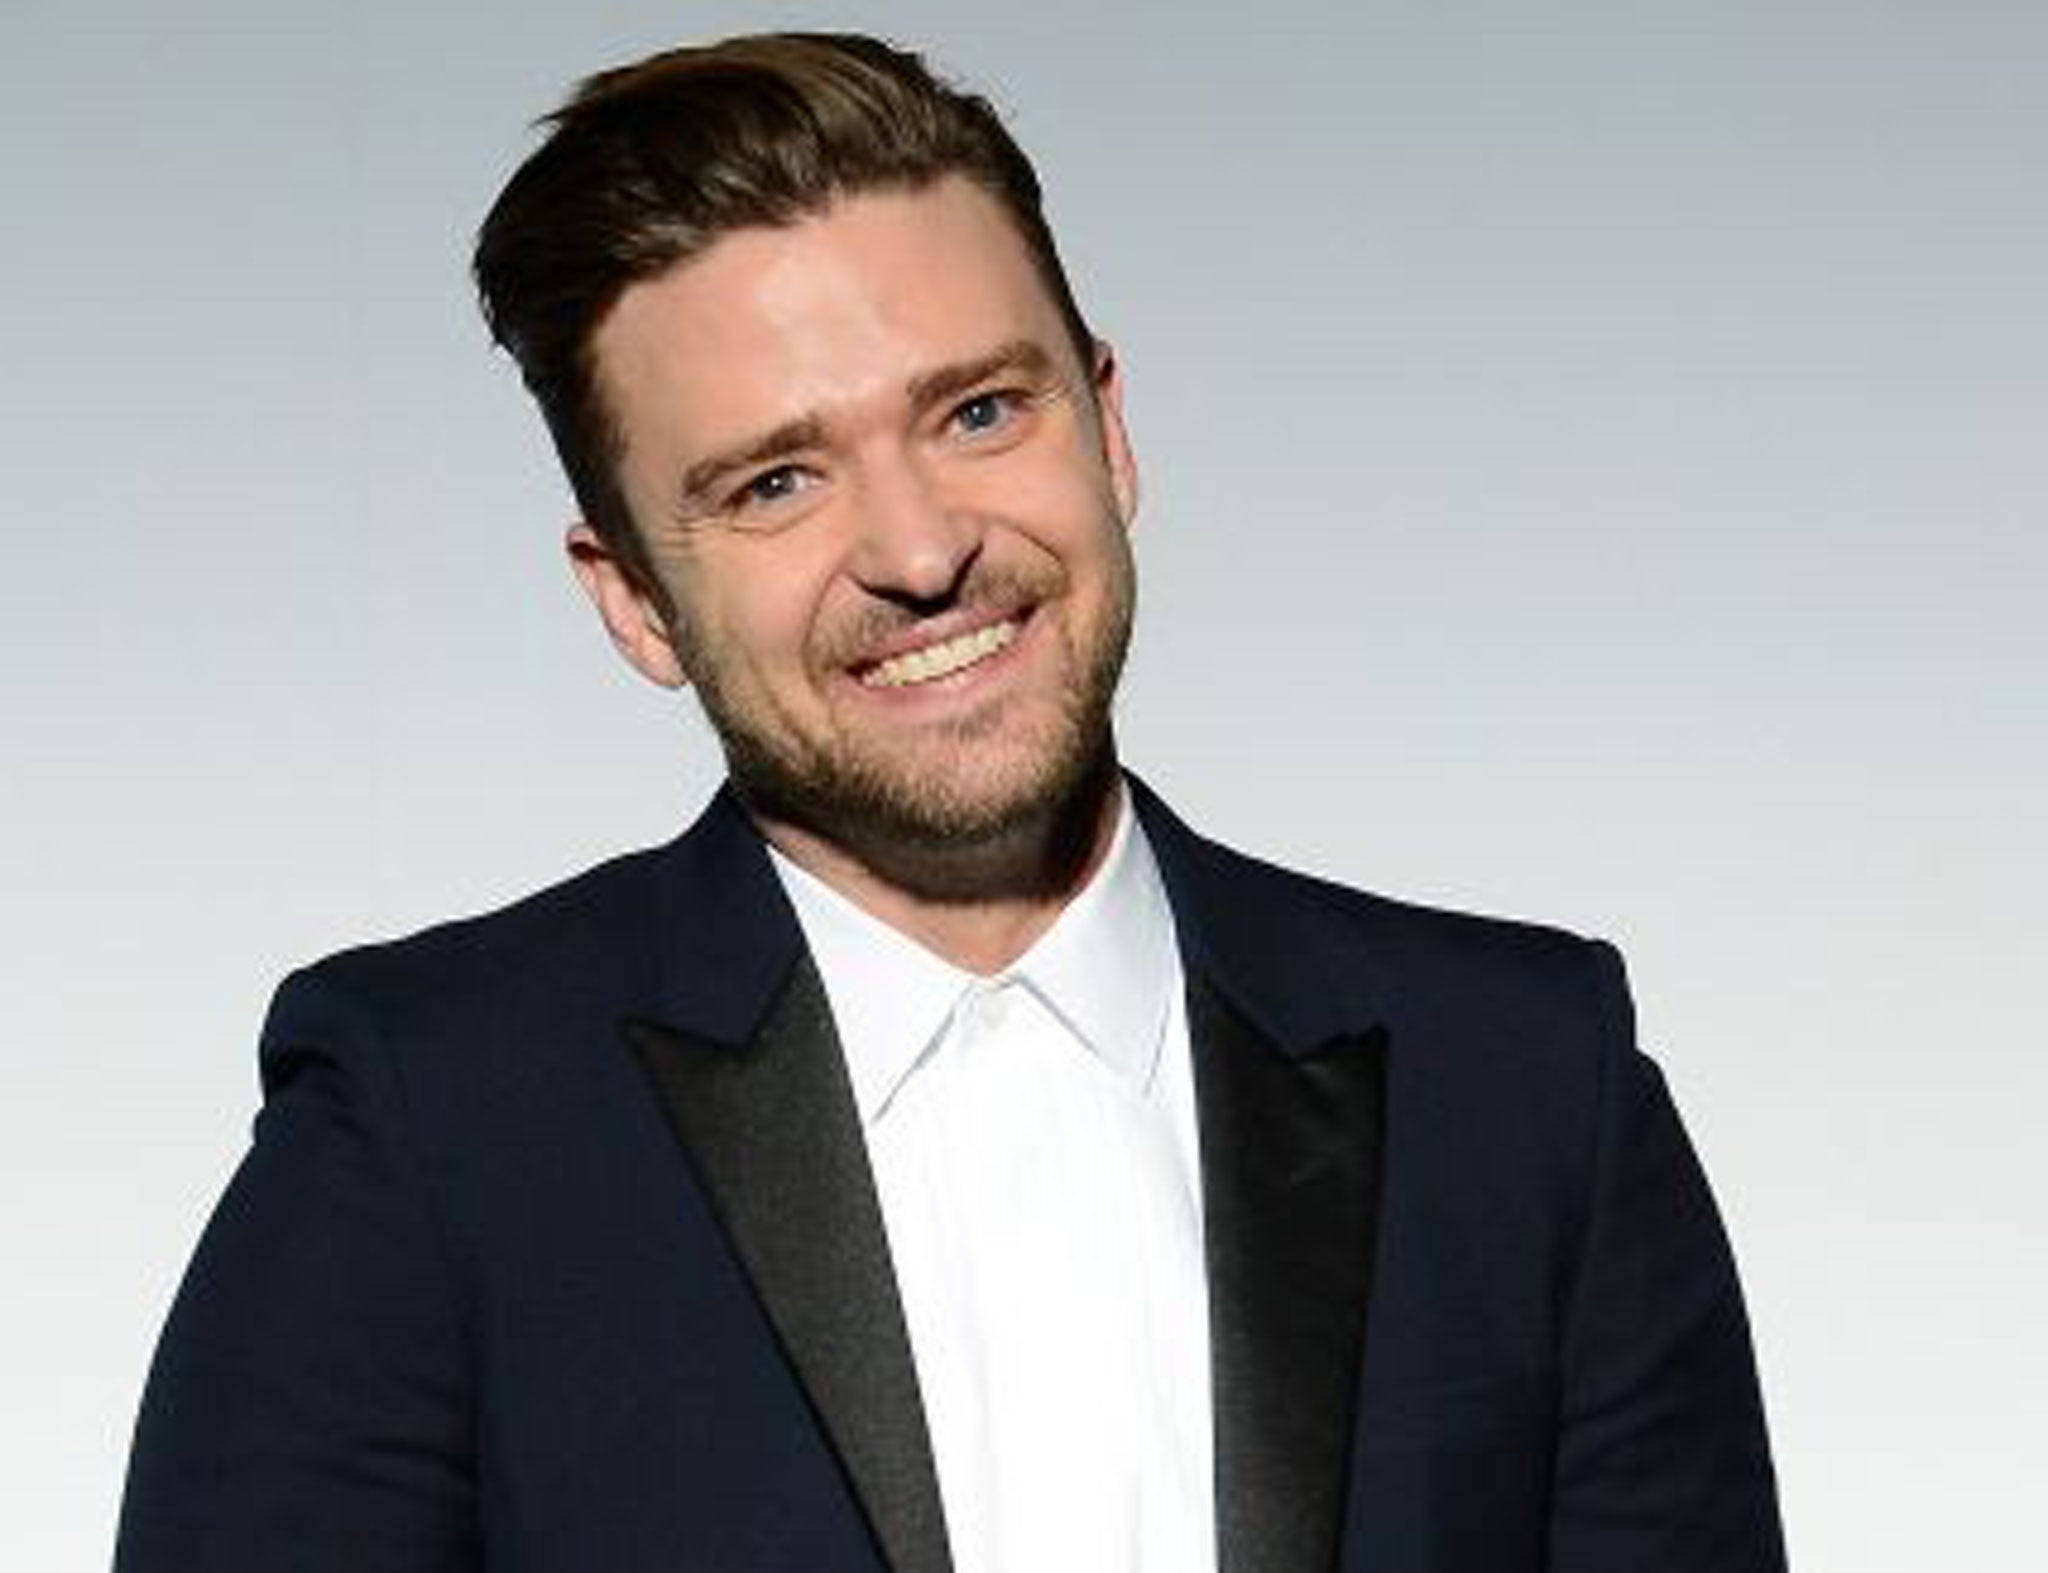 Justin Timberlake: Miley Cyrus should not be forced to be a role model, The Independent